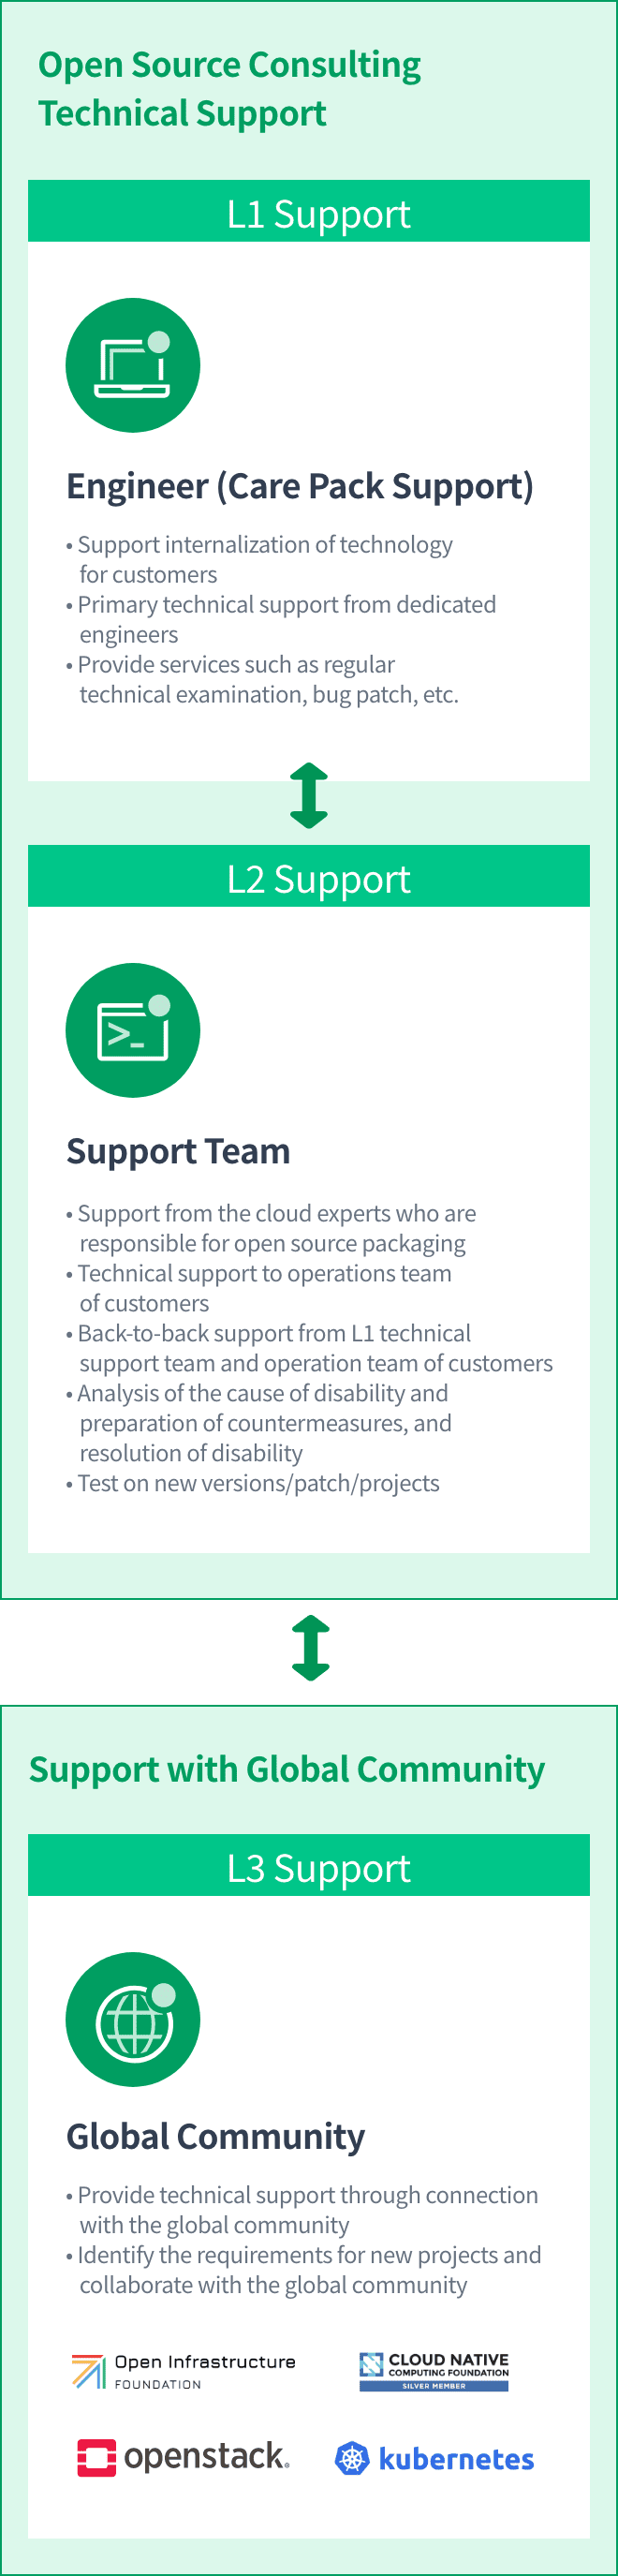 Technical Support System of Open Source Consulting